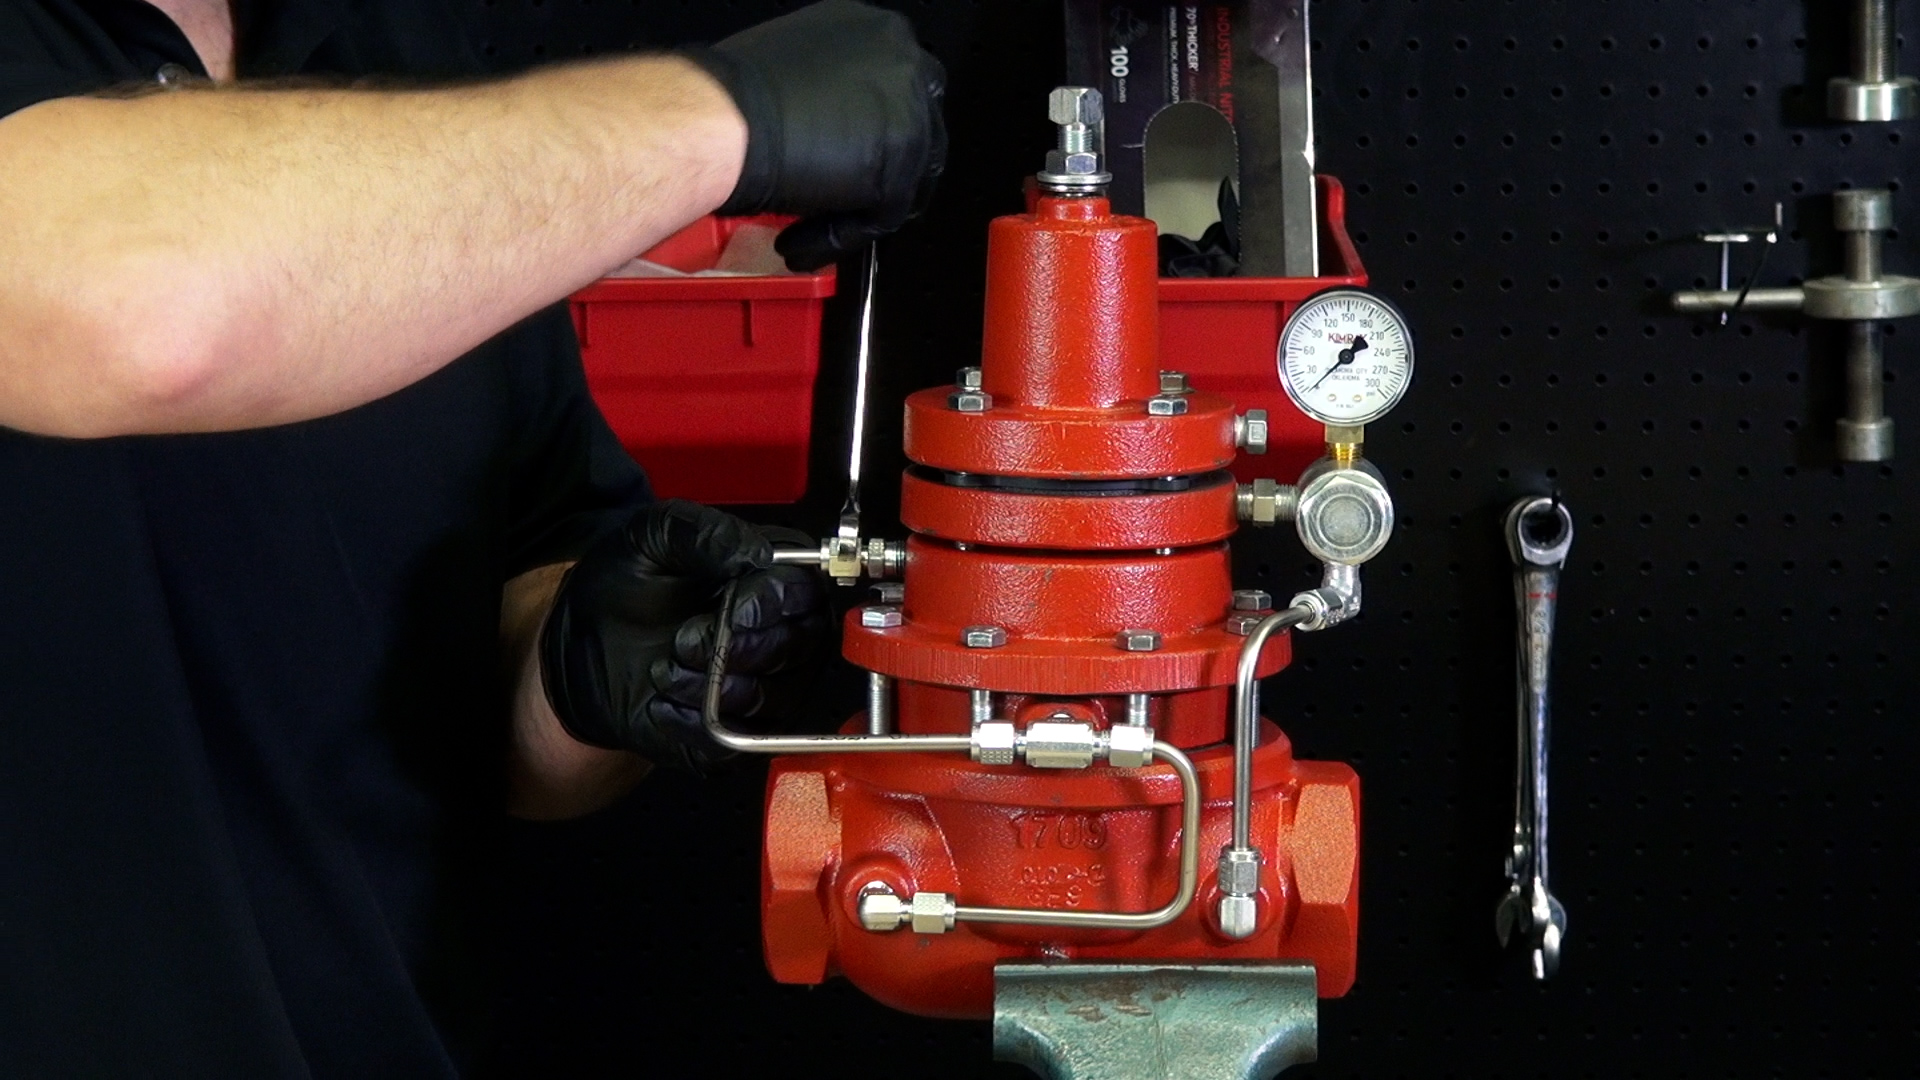 How to Convert a Gas Regulator from Vent to Non-vent